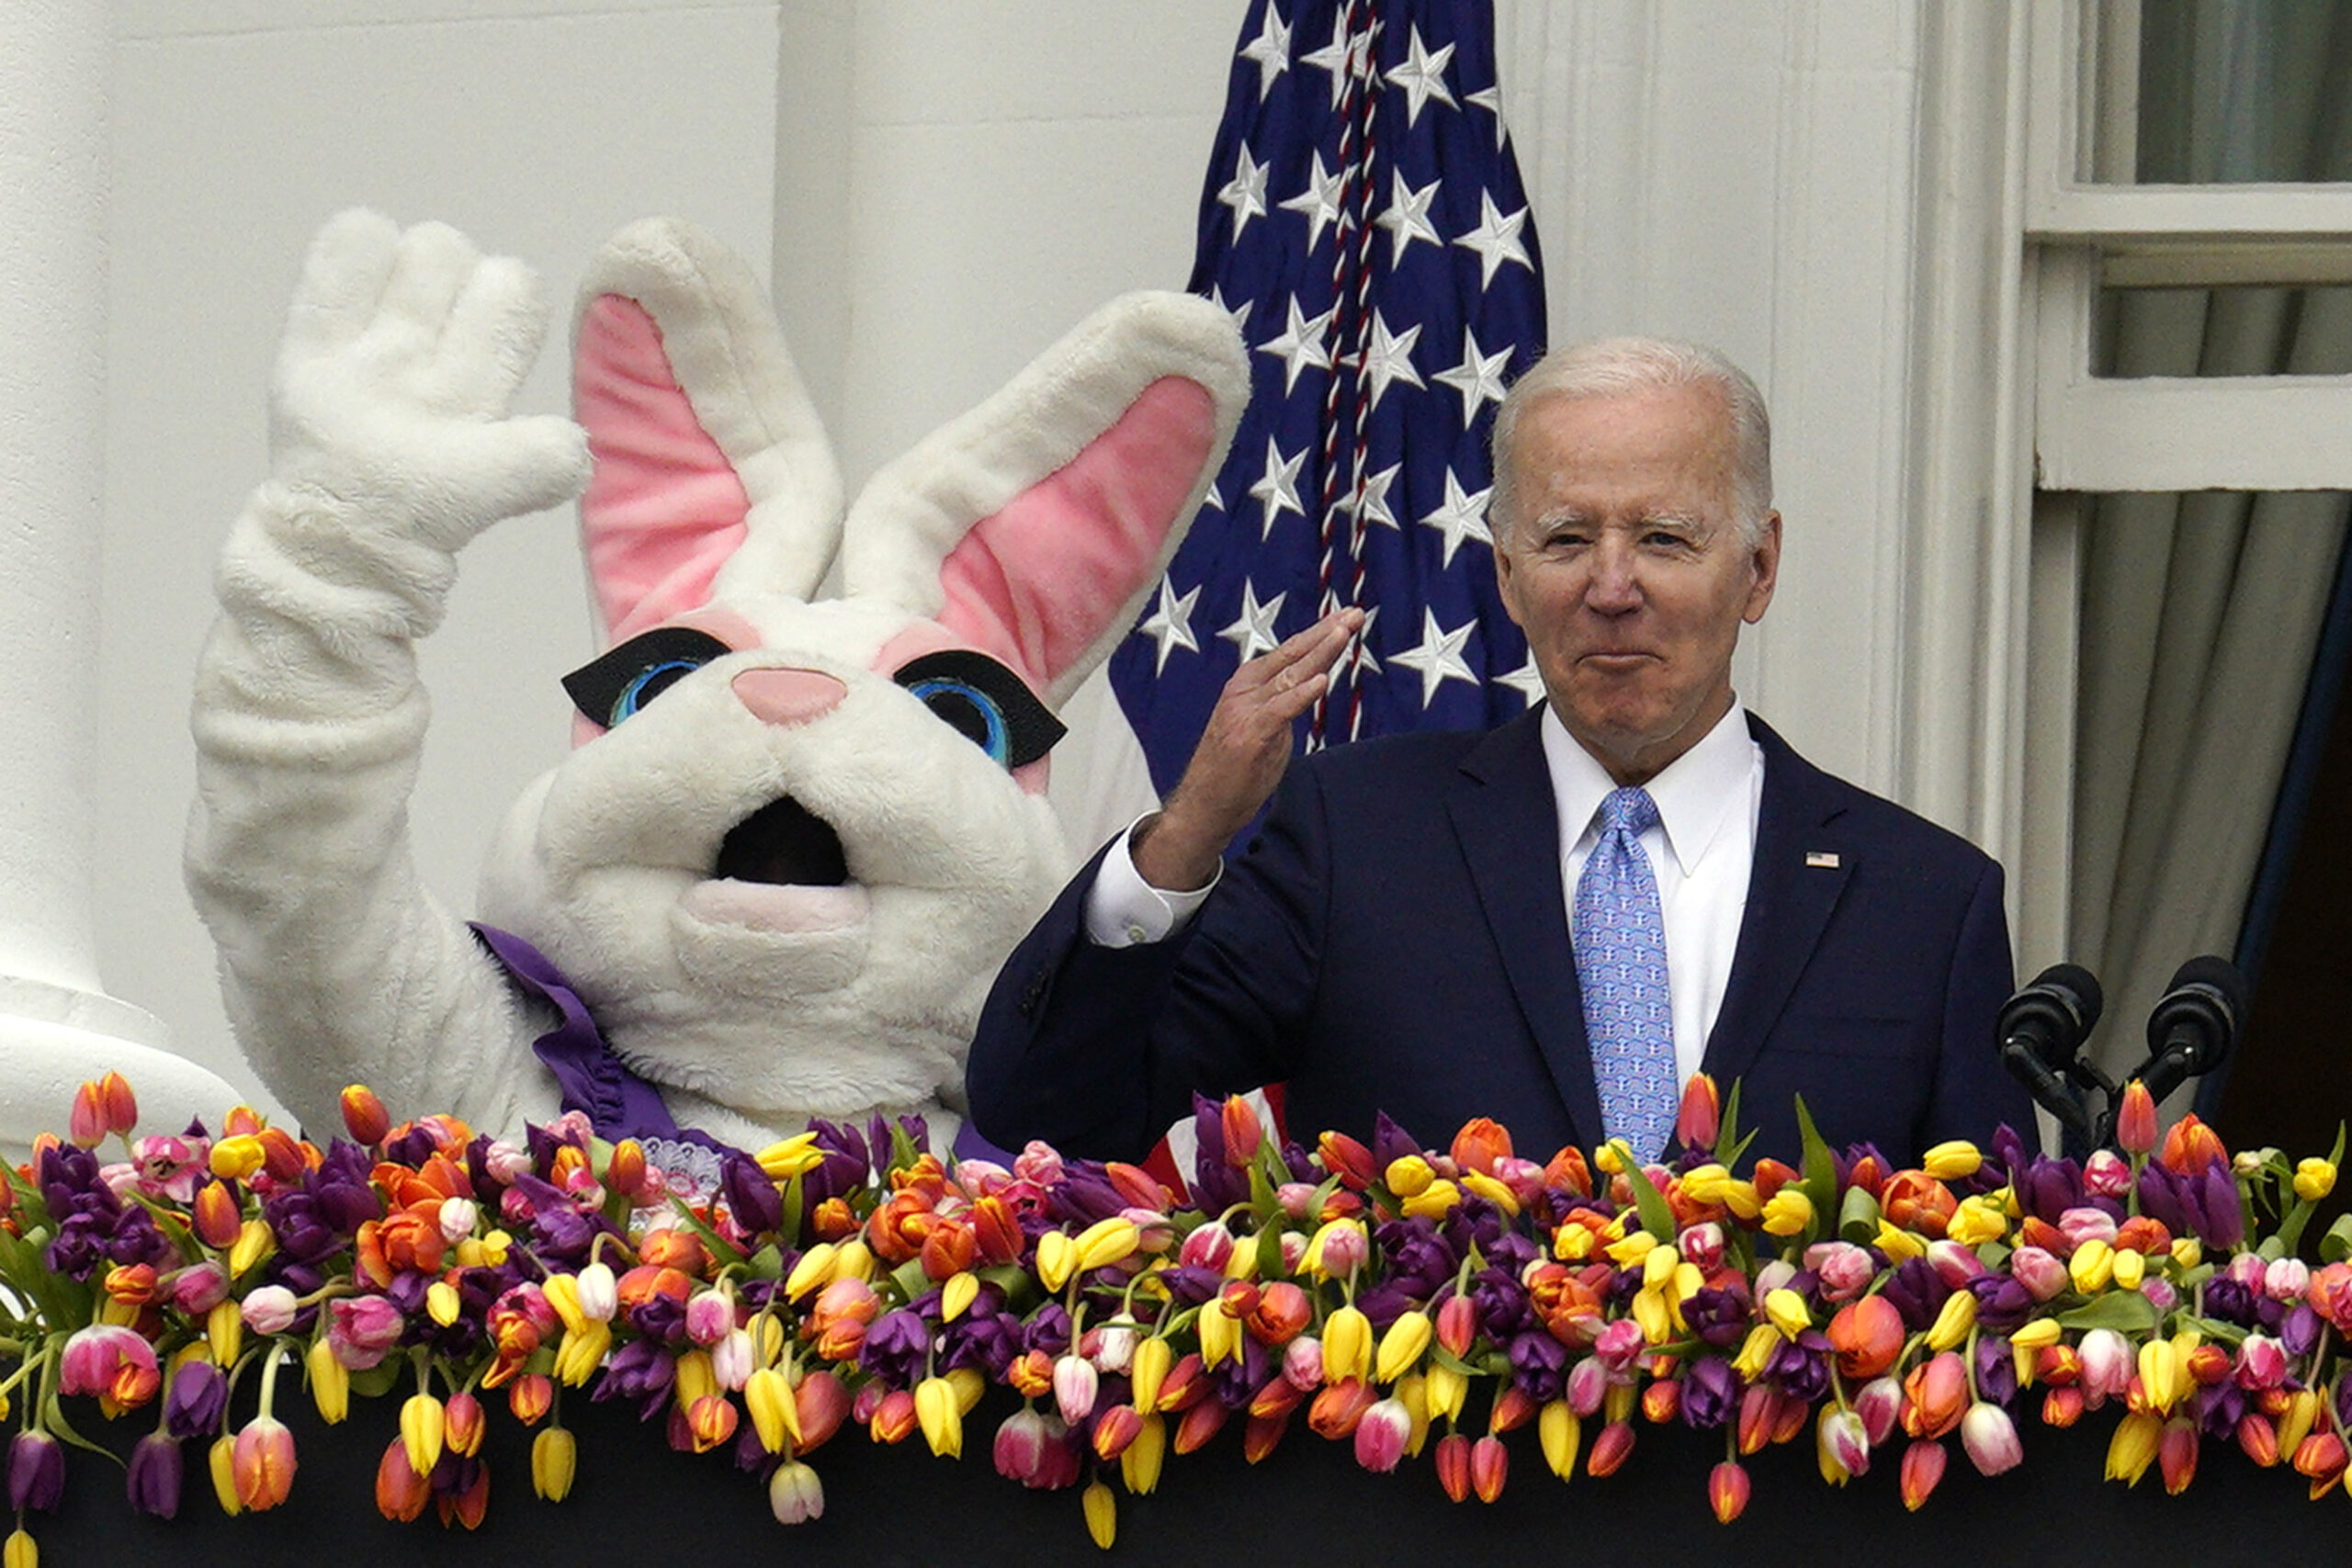 Daily Caller Fully Retracts Article Claiming Biden Banned ‘Religious Easter Eggs’ From White House Contest (mediaite.com)